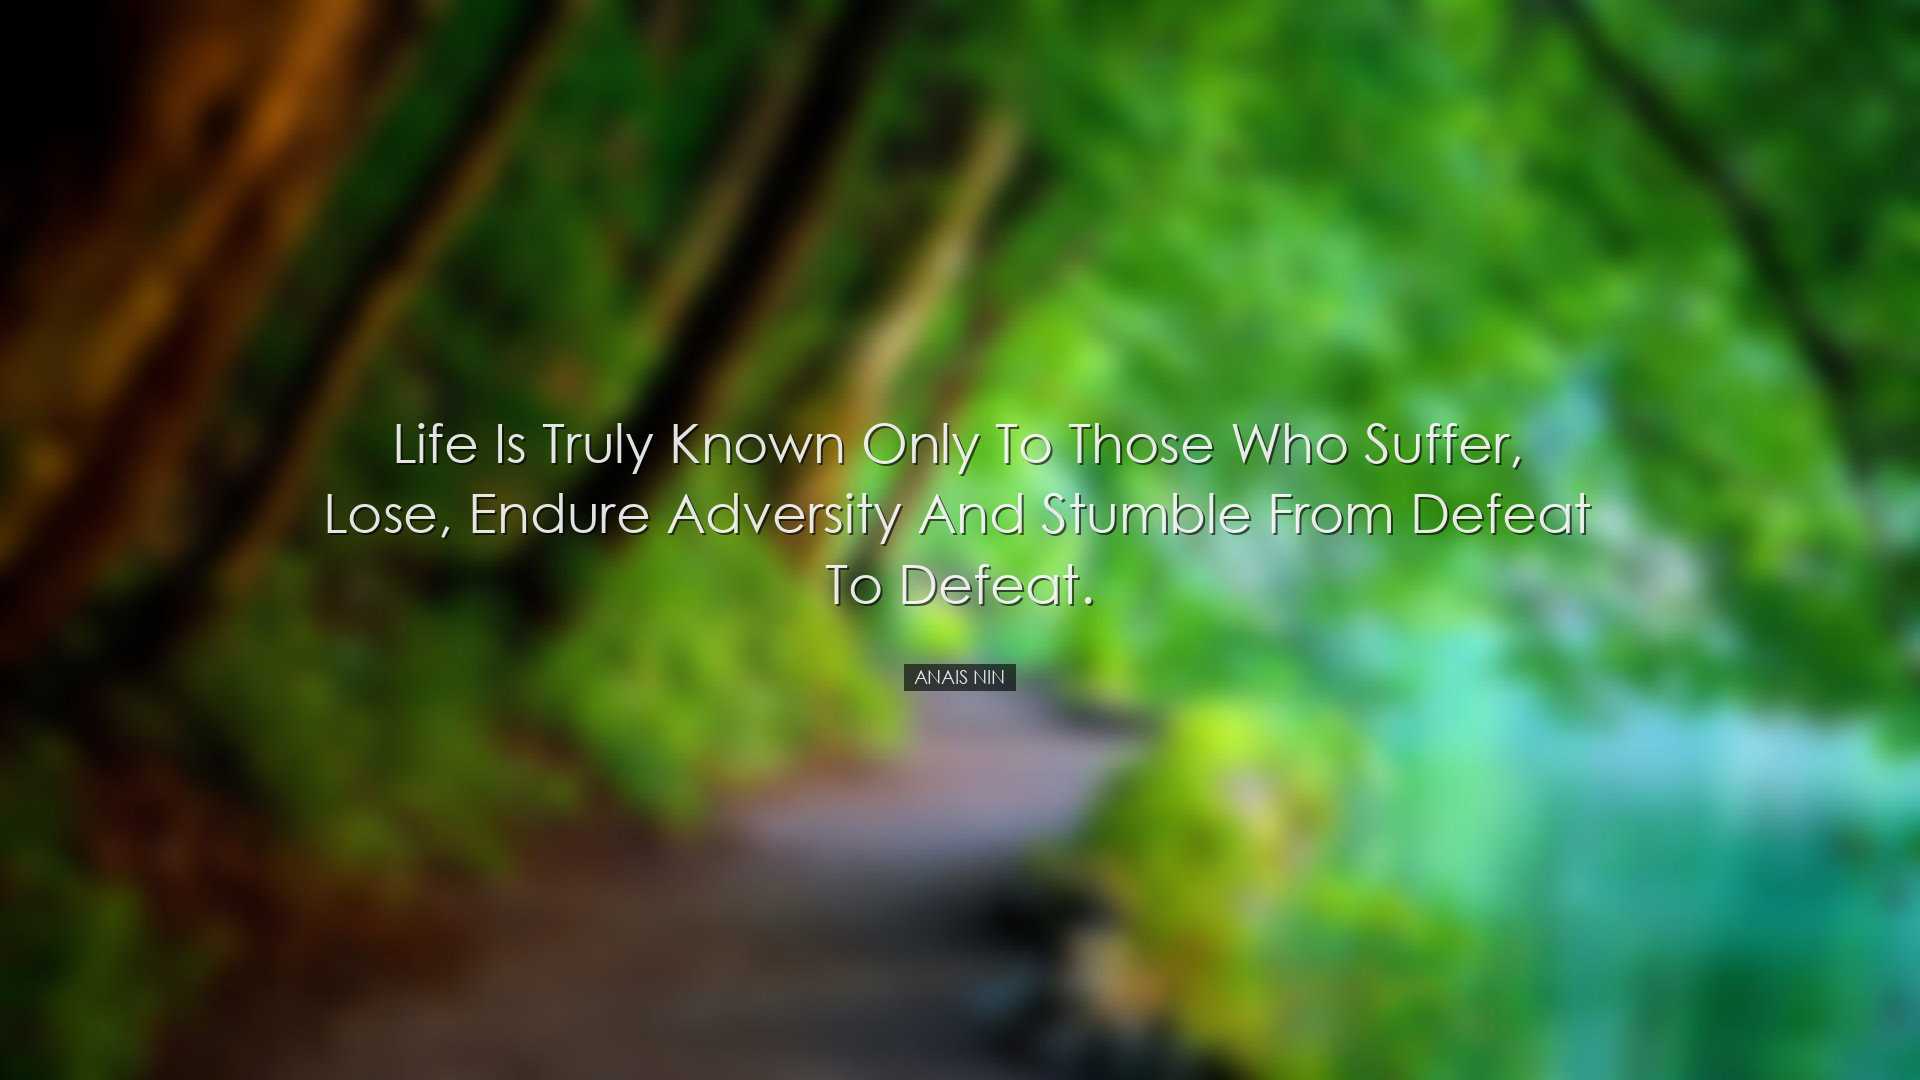 Life is truly known only to those who suffer, lose, endure adversi